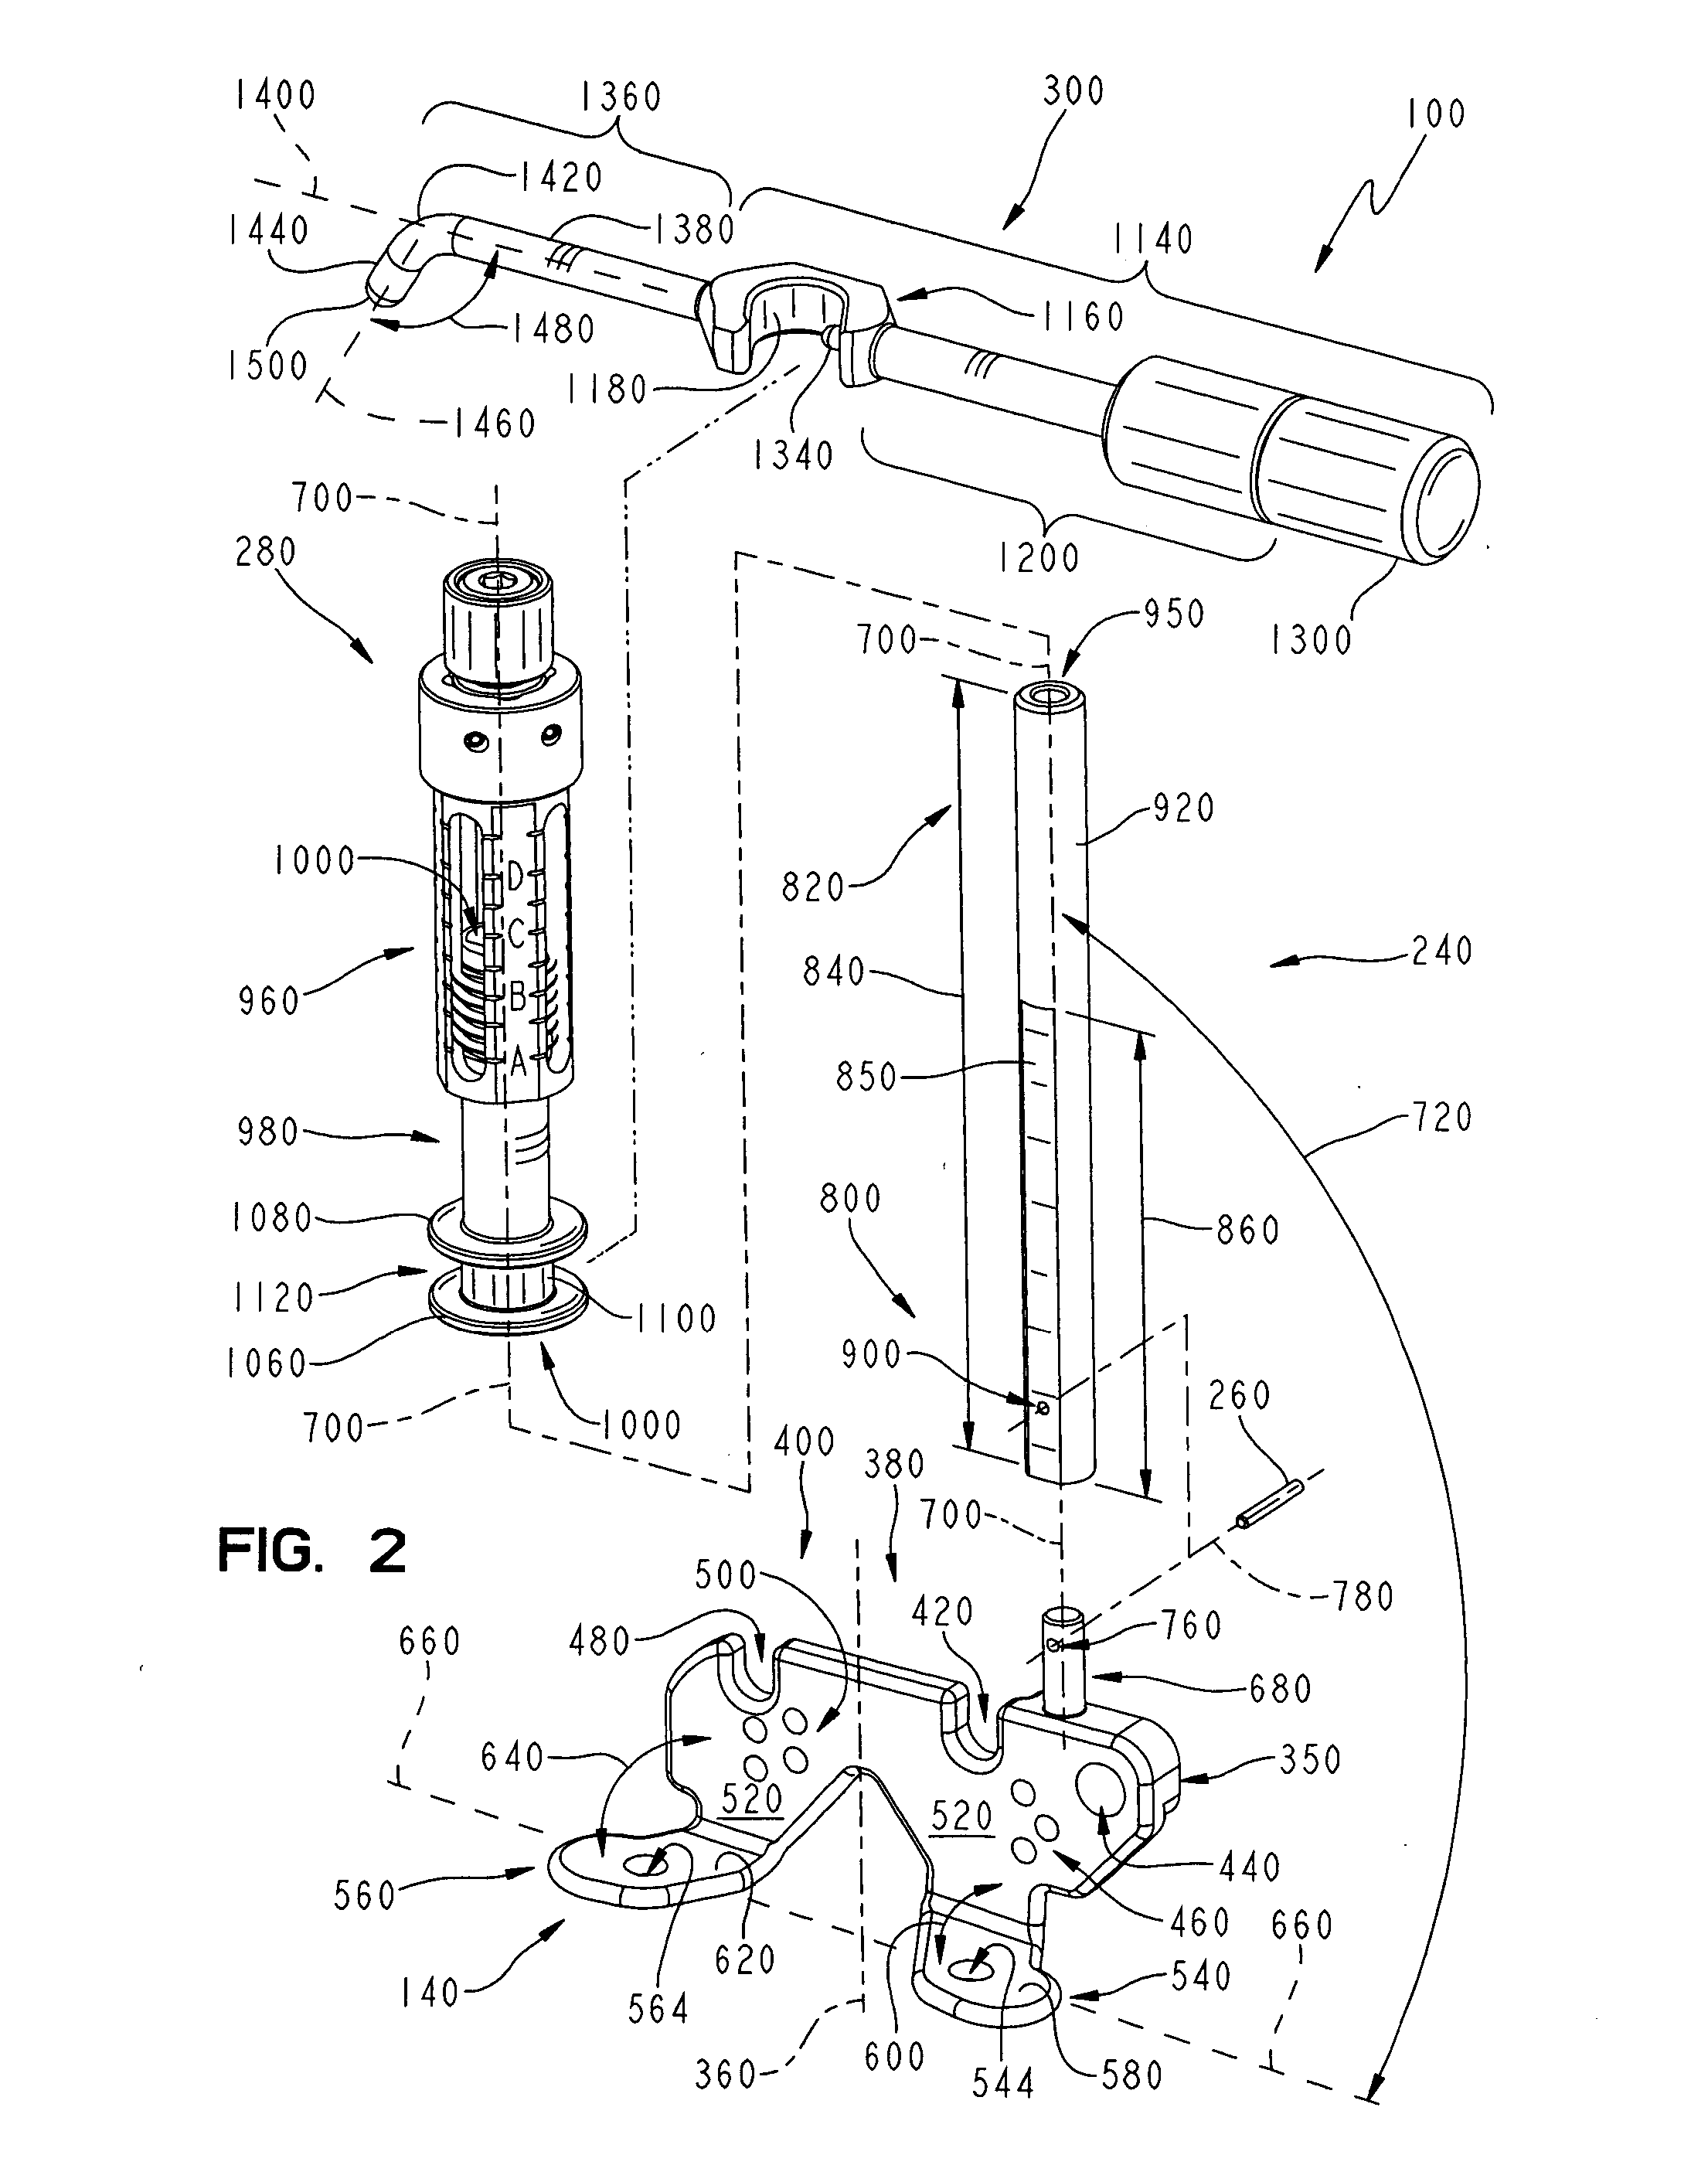 Apparatus and method for sizing a distal femur